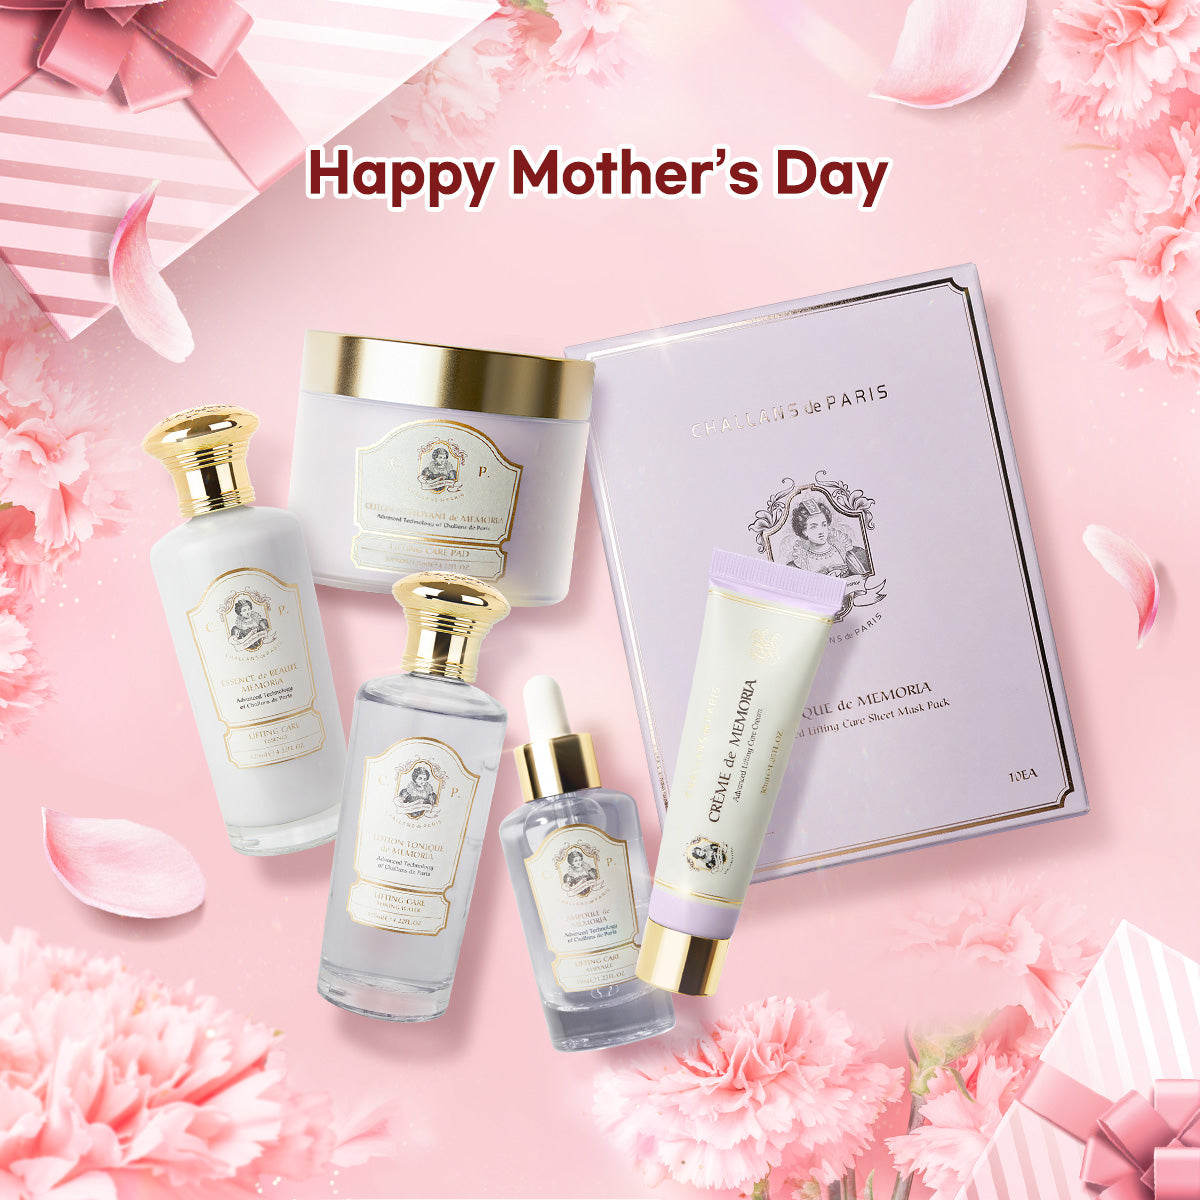 [Mother's Day] Wrinkle Care 6 step Complete set